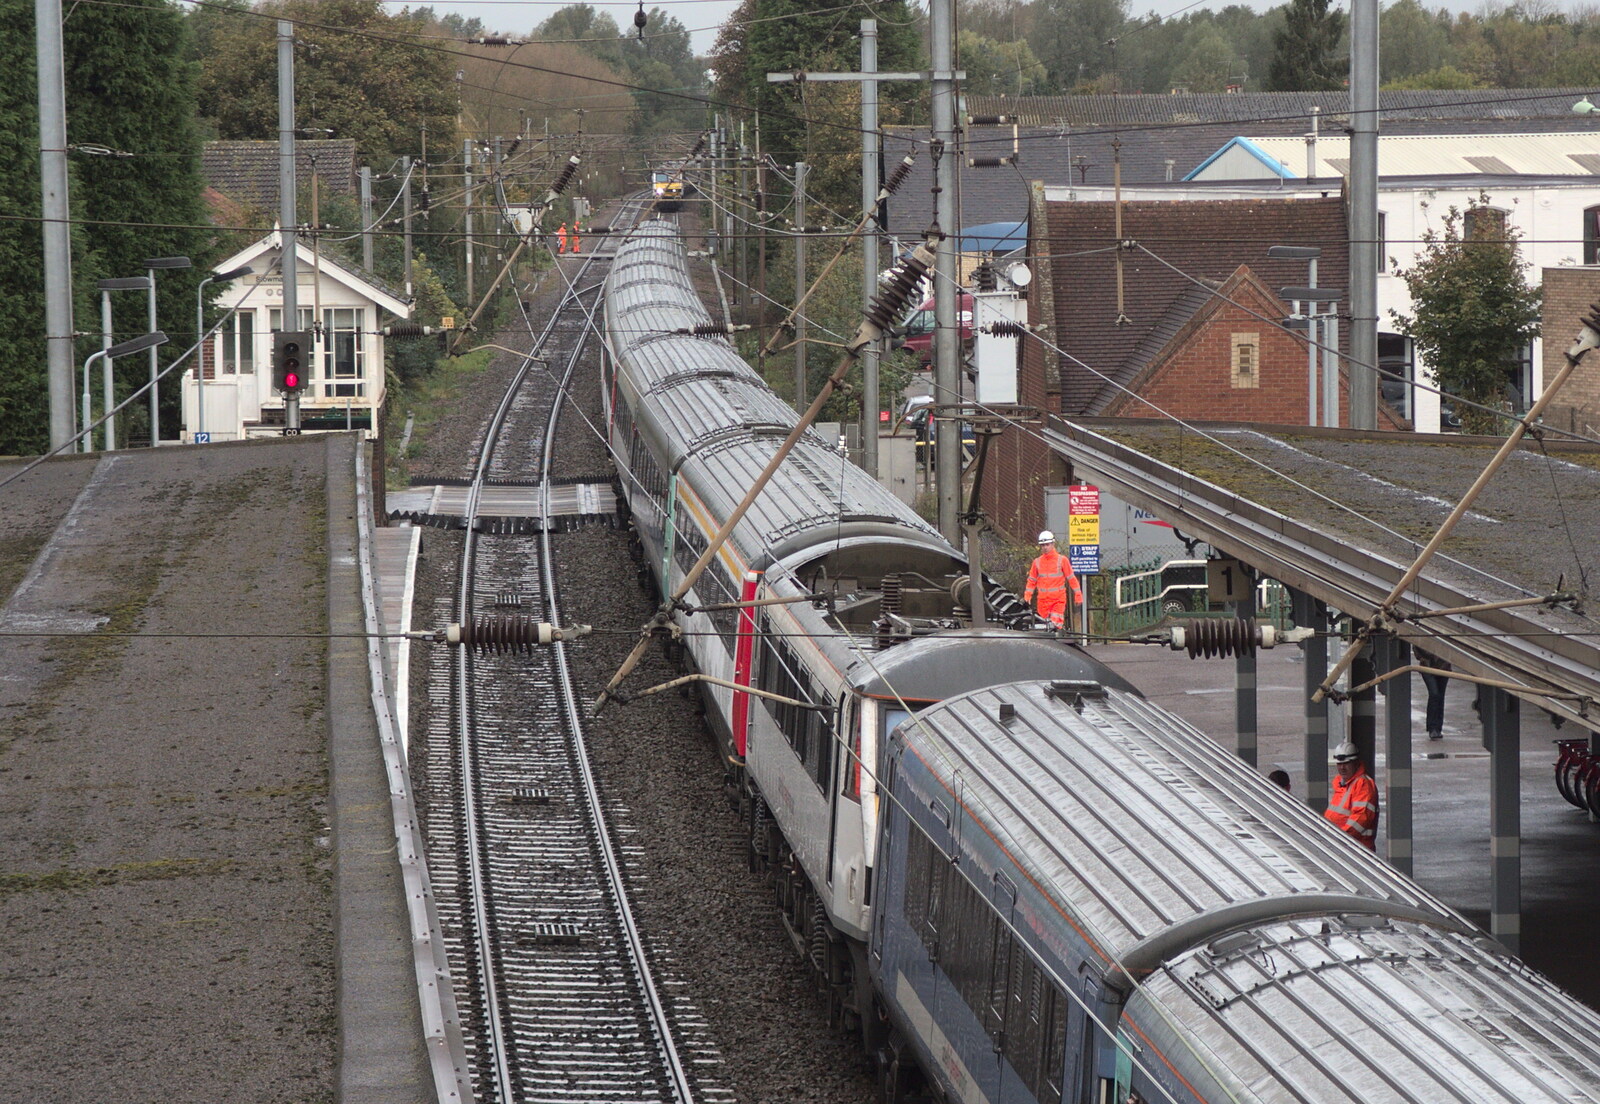 There's another train right behind from (Very) Long Train (Not) Running, Stowmarket, Suffolk - 21st October 2014